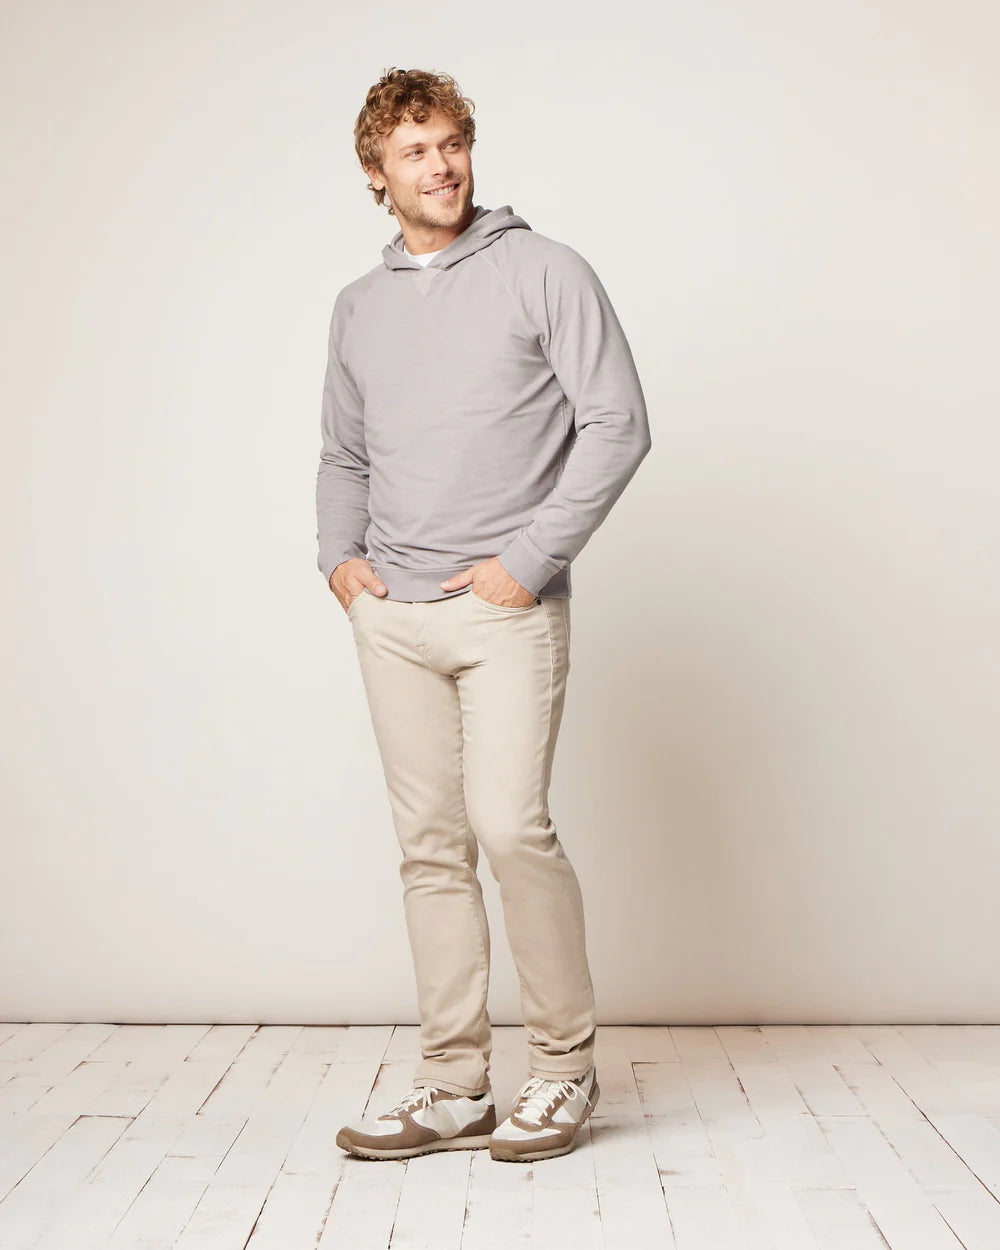 Every guy needs a go-to hoodie that they can grab for casual outings or a day around the house. Our Amos Hoodie is made of a premium fabric blend that gives you all the softness of cotton with the perfect hint of stretch.